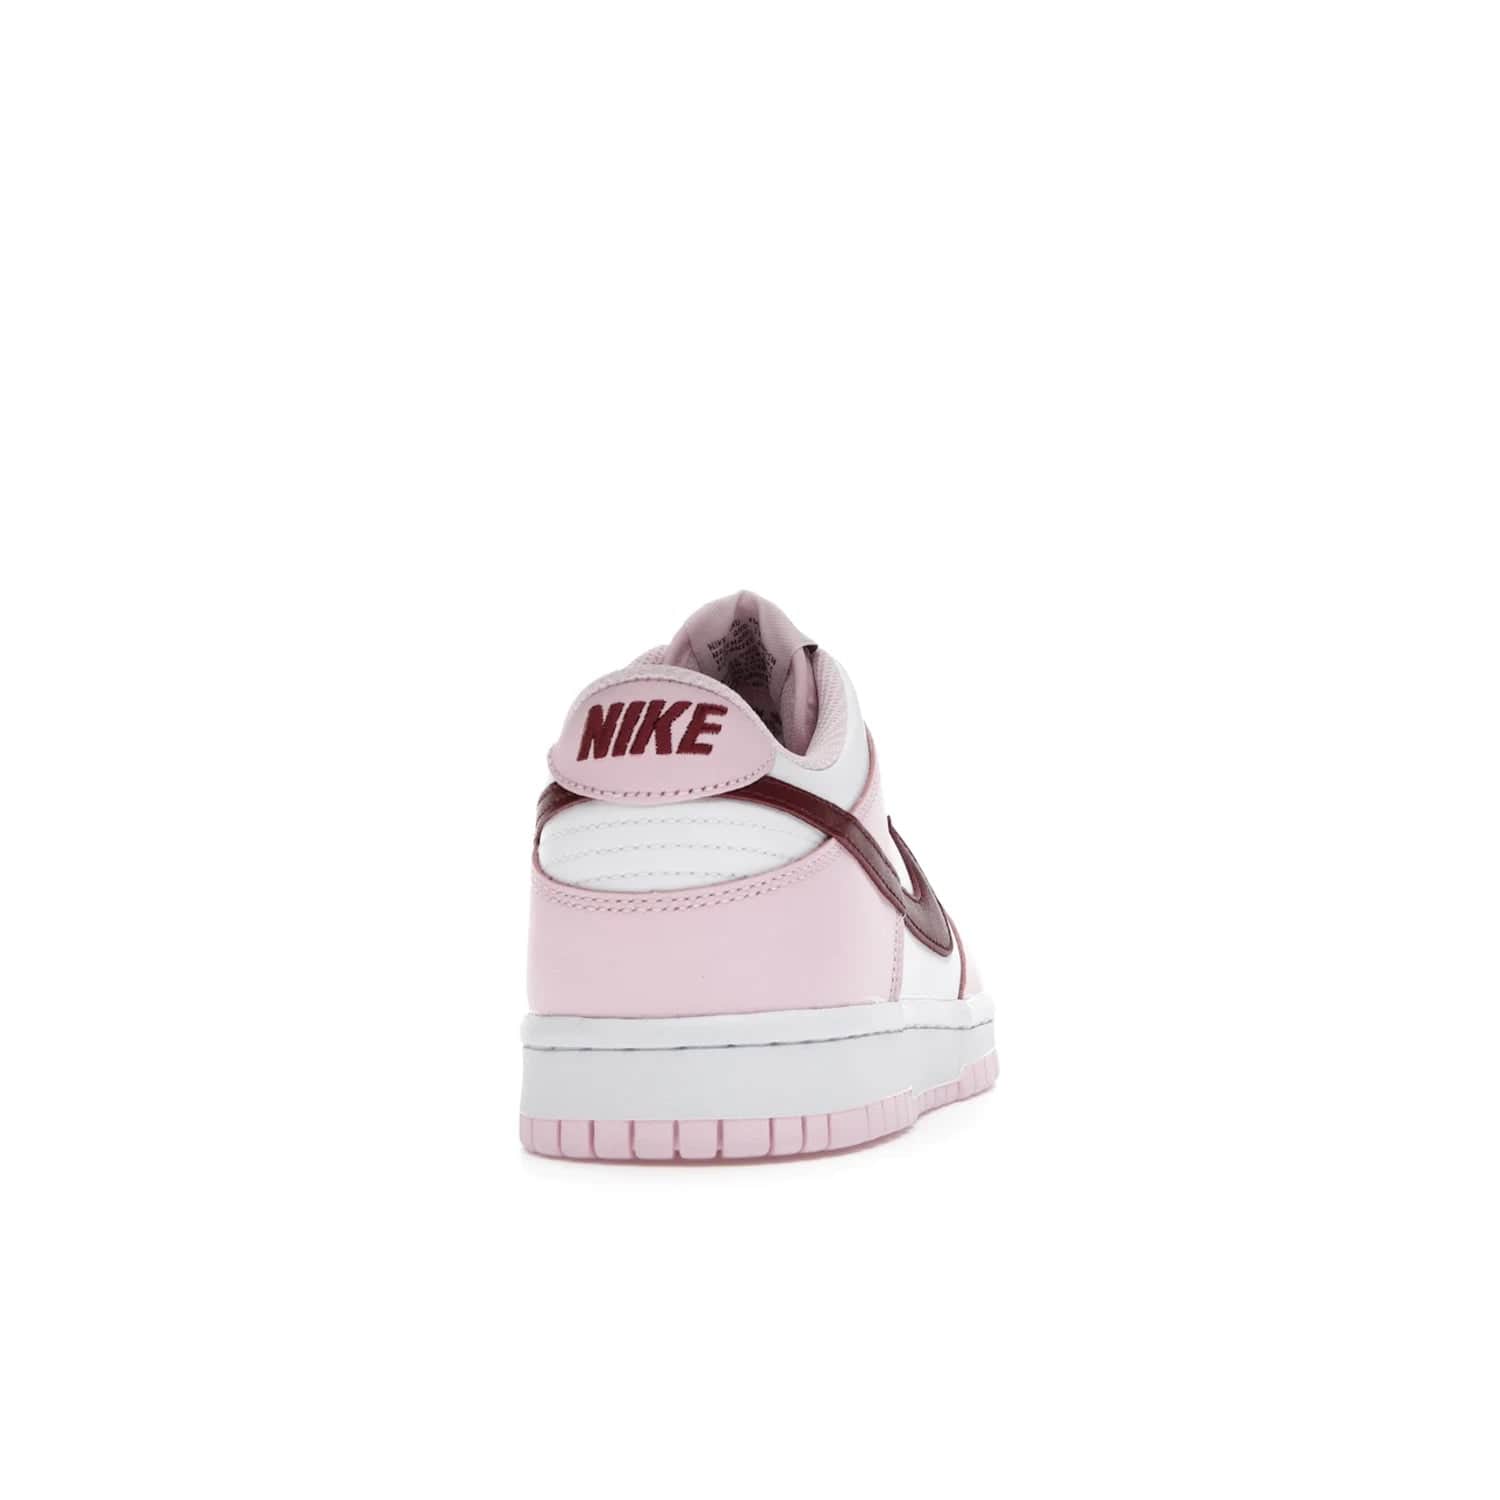 Nike Dunk Low Pink Foam Red White (GS) - Image 29 - Only at www.BallersClubKickz.com - #
Introducing the daring and stylish Nike Dunk Low Pink Foam Red White (GS) sneaker for grade schoolers. White leather with pink overlays and Dark Beetroot accents, classic Nike Dunk midsole and pink outsole. Released August 2021 for $85.